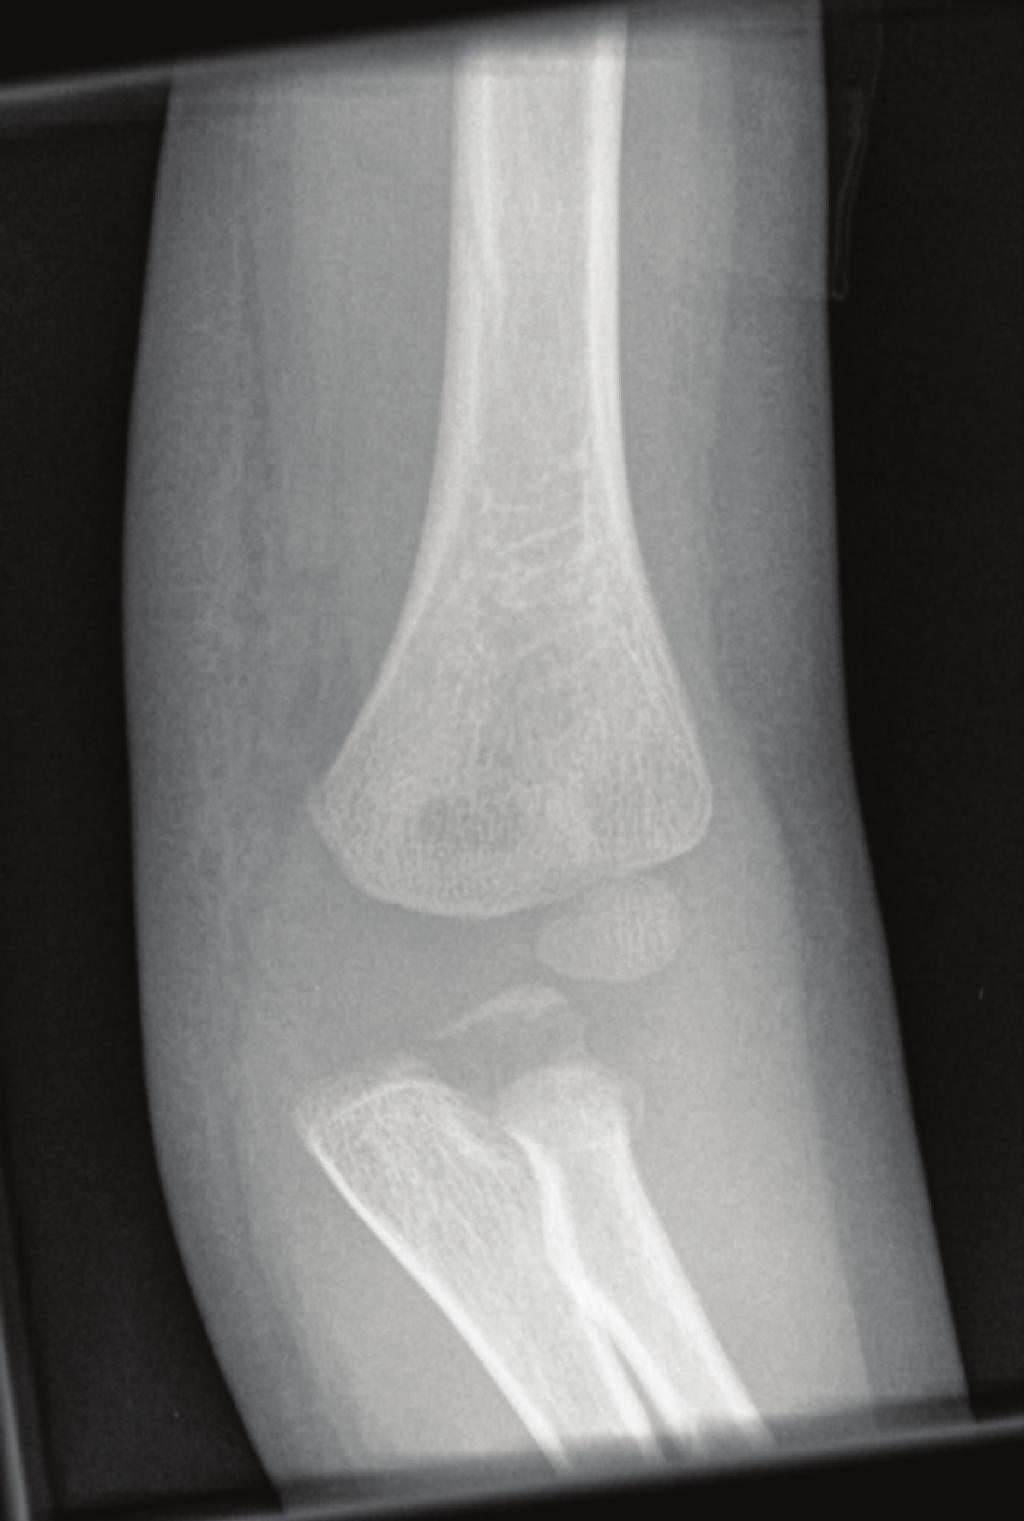 Radiographs (Figures 5 and 6) demonstrated full union of the olecranon fracture and elbow joint articular congruency. 3. Discussion Monteggia fractures are uncommon and account for about 0.